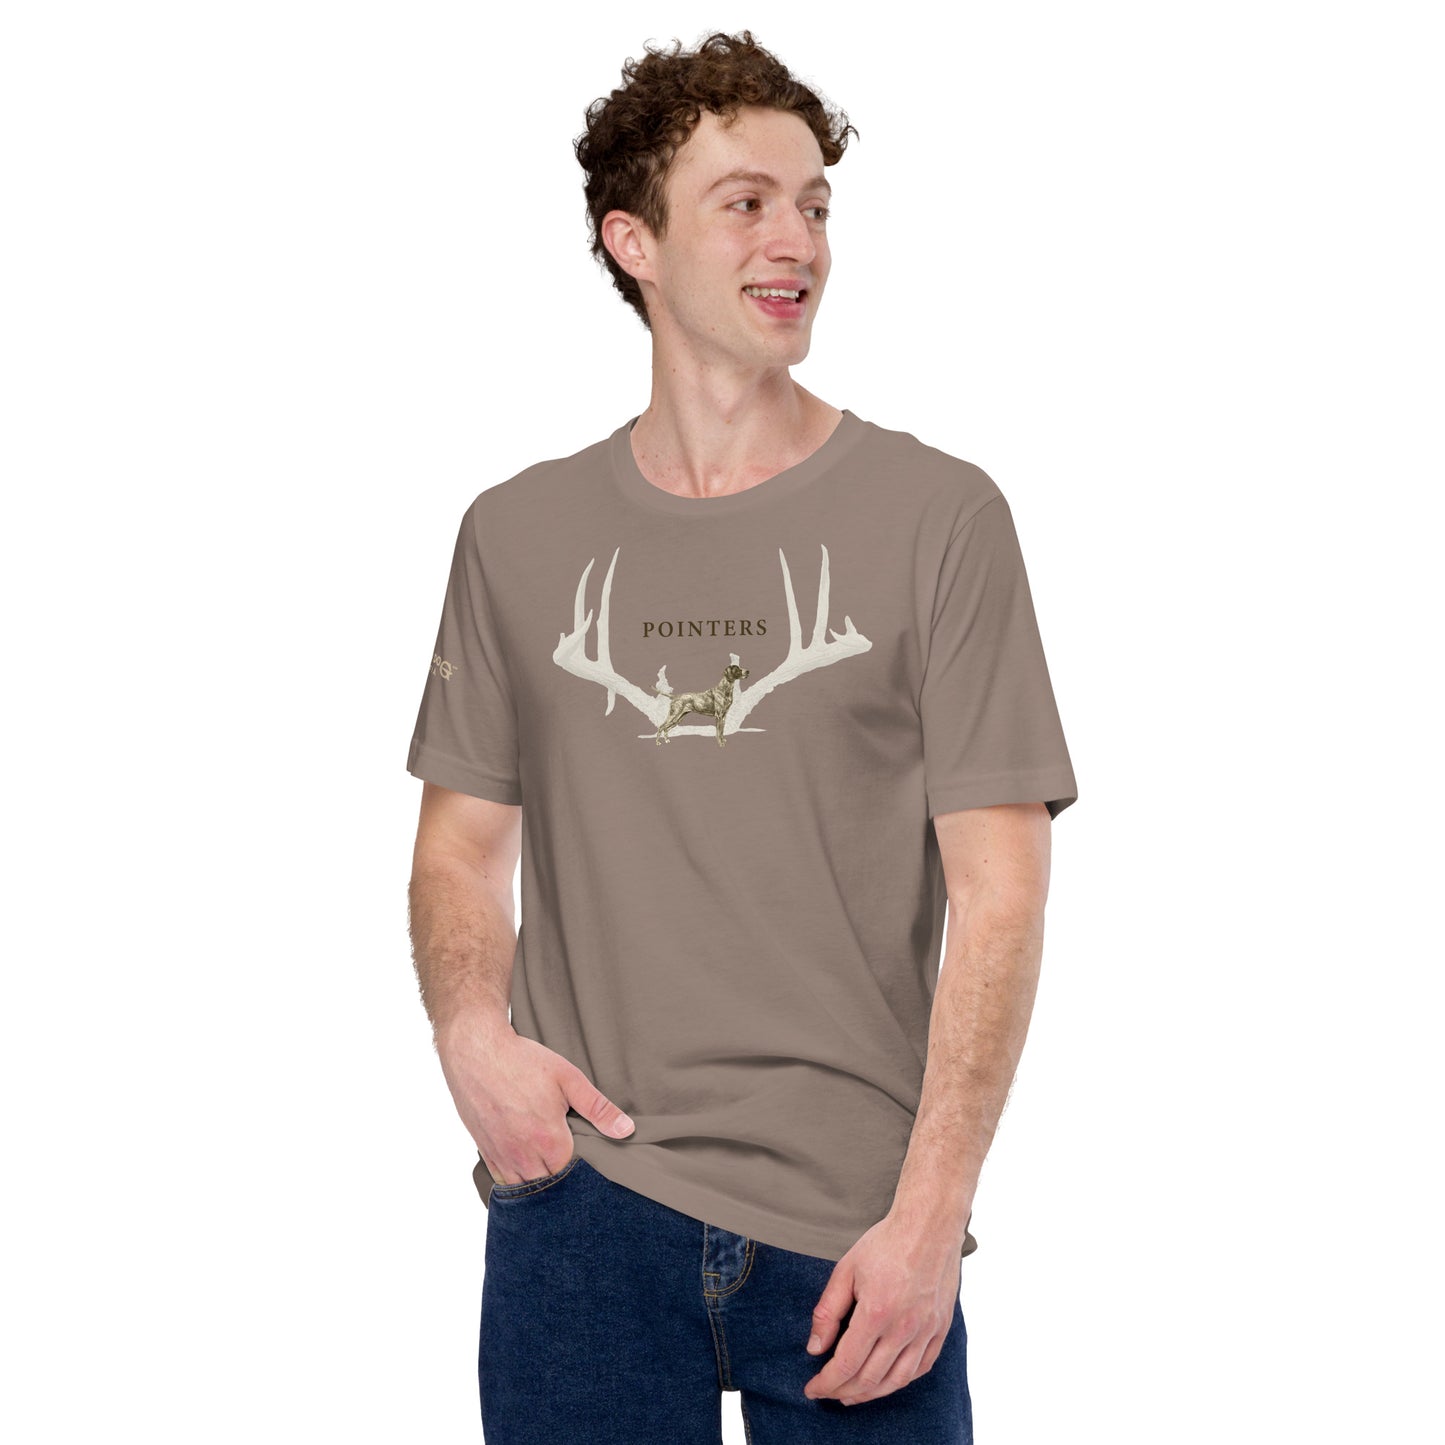 Pointers t-shirt